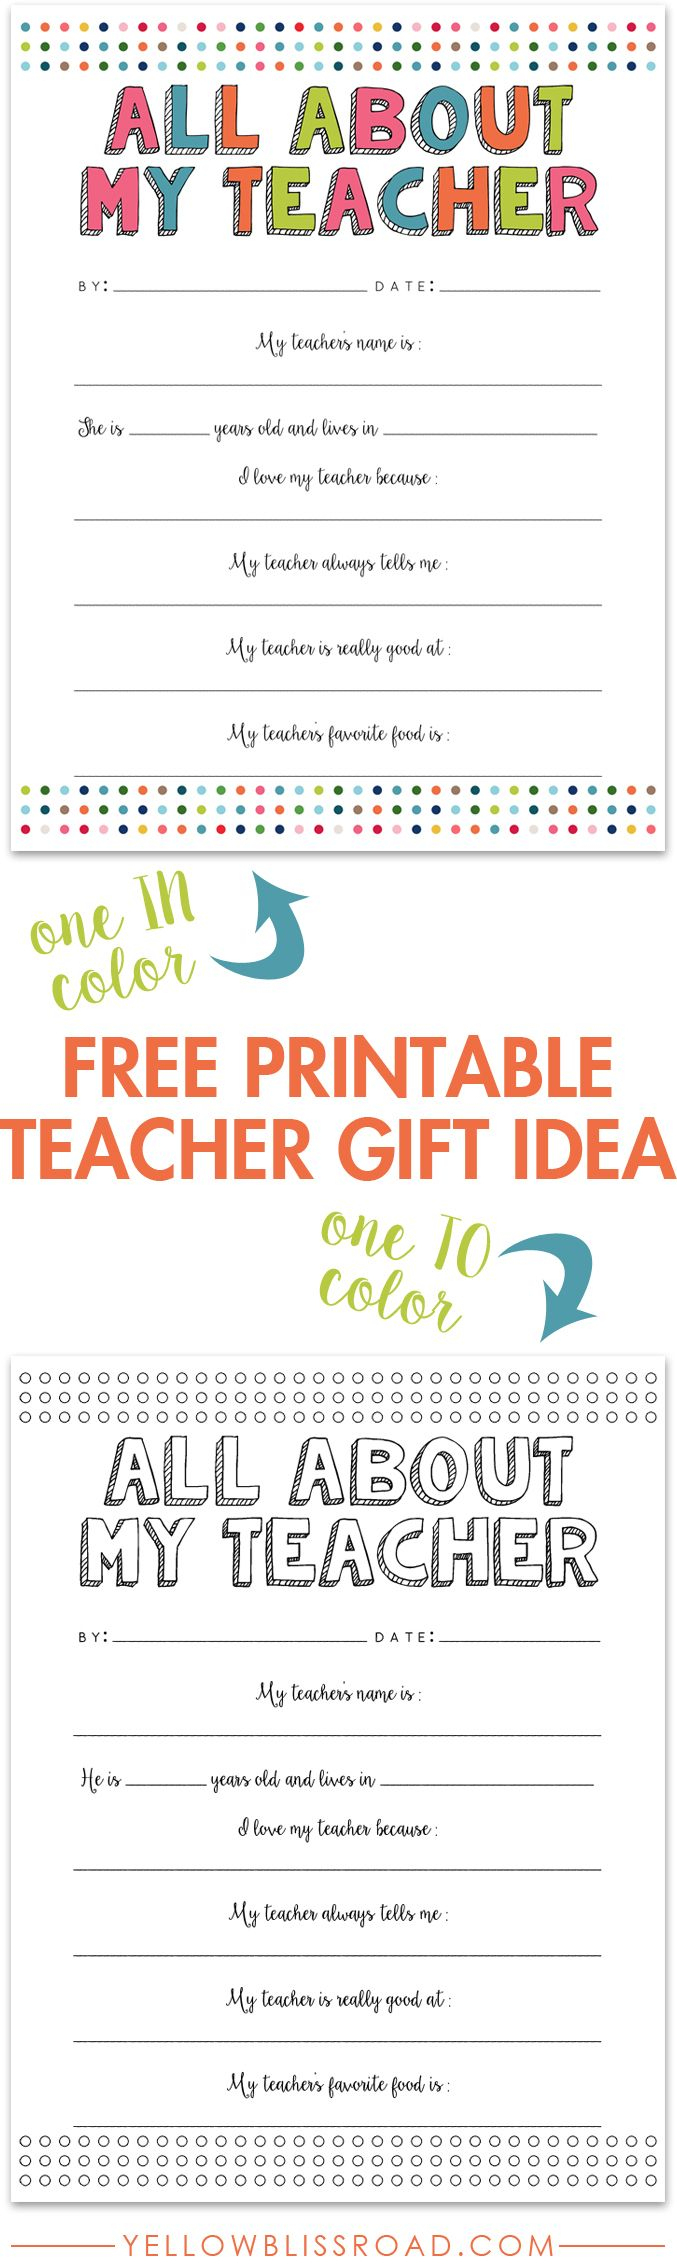 All About My Teacher Free Printable | Best Of Pinterest | Pinterest - All About My Teacher Free Printable